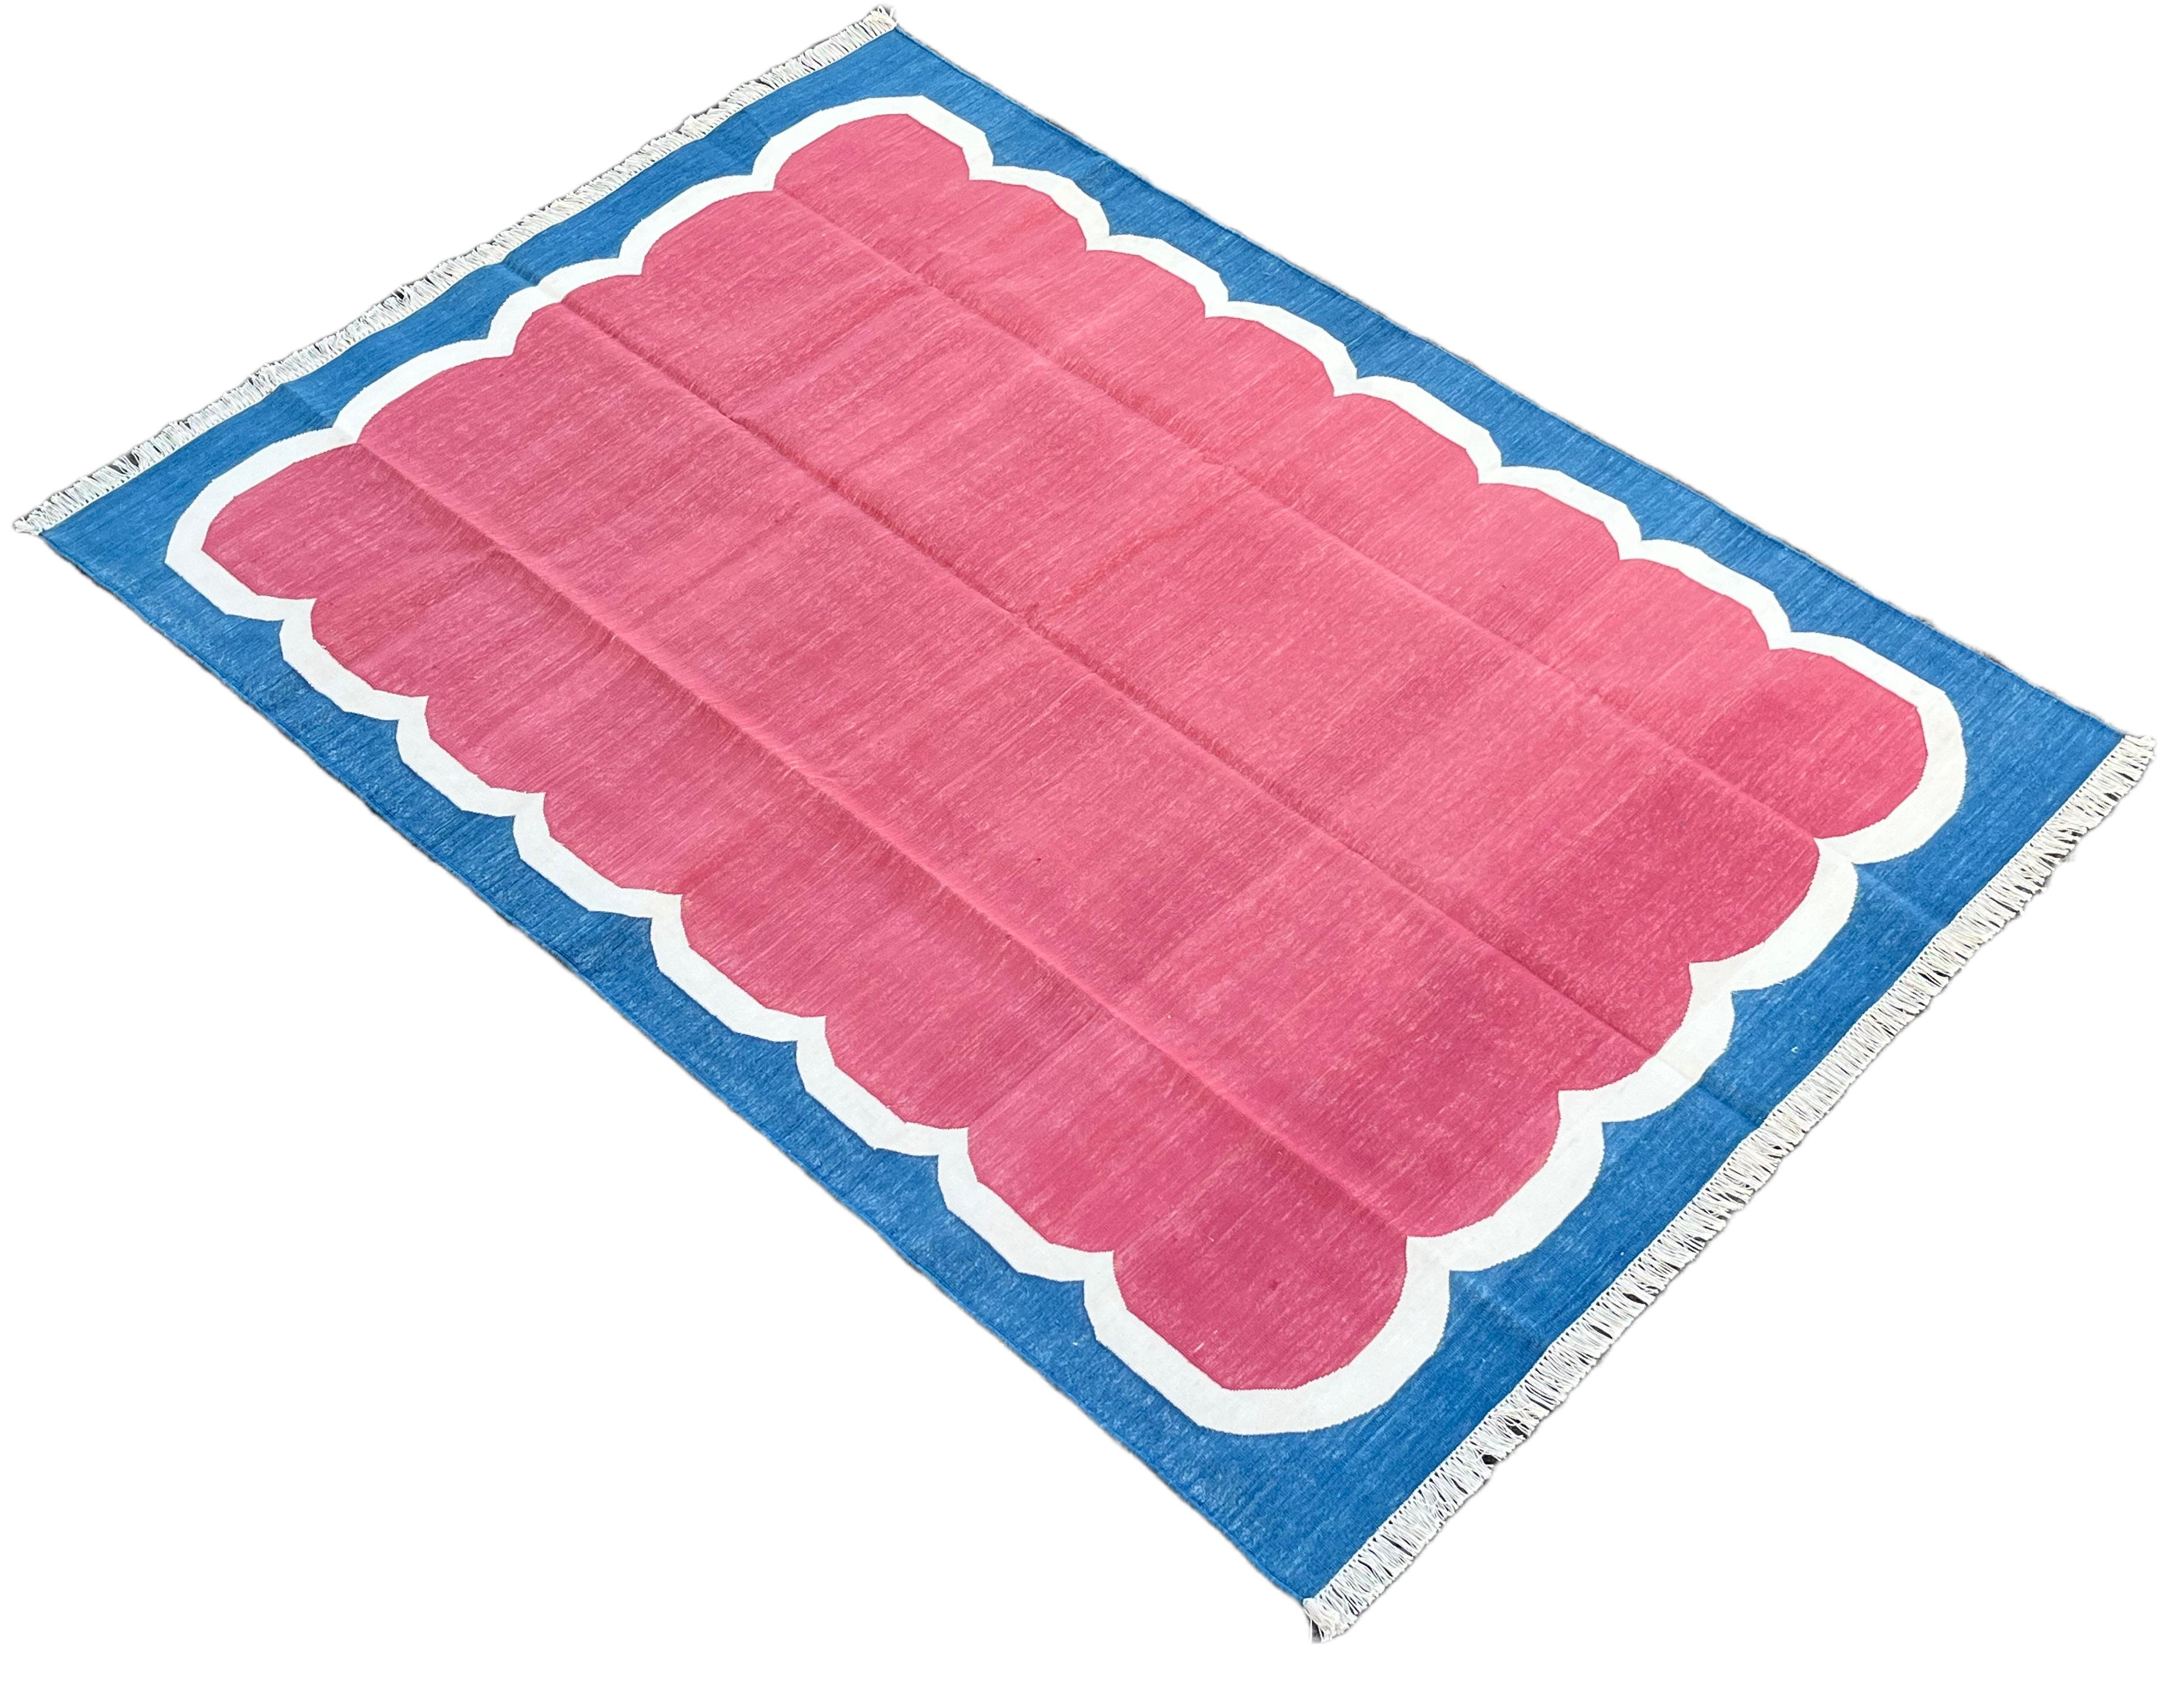 Cotton Vegetable Dyed Pink And Blue Scalloped Striped Indian Dhurrie Rug-5'x7' 
These special flat-weave dhurries are hand-woven with 15 ply 100% cotton yarn. Due to the special manufacturing techniques used to create our rugs, the size and color of